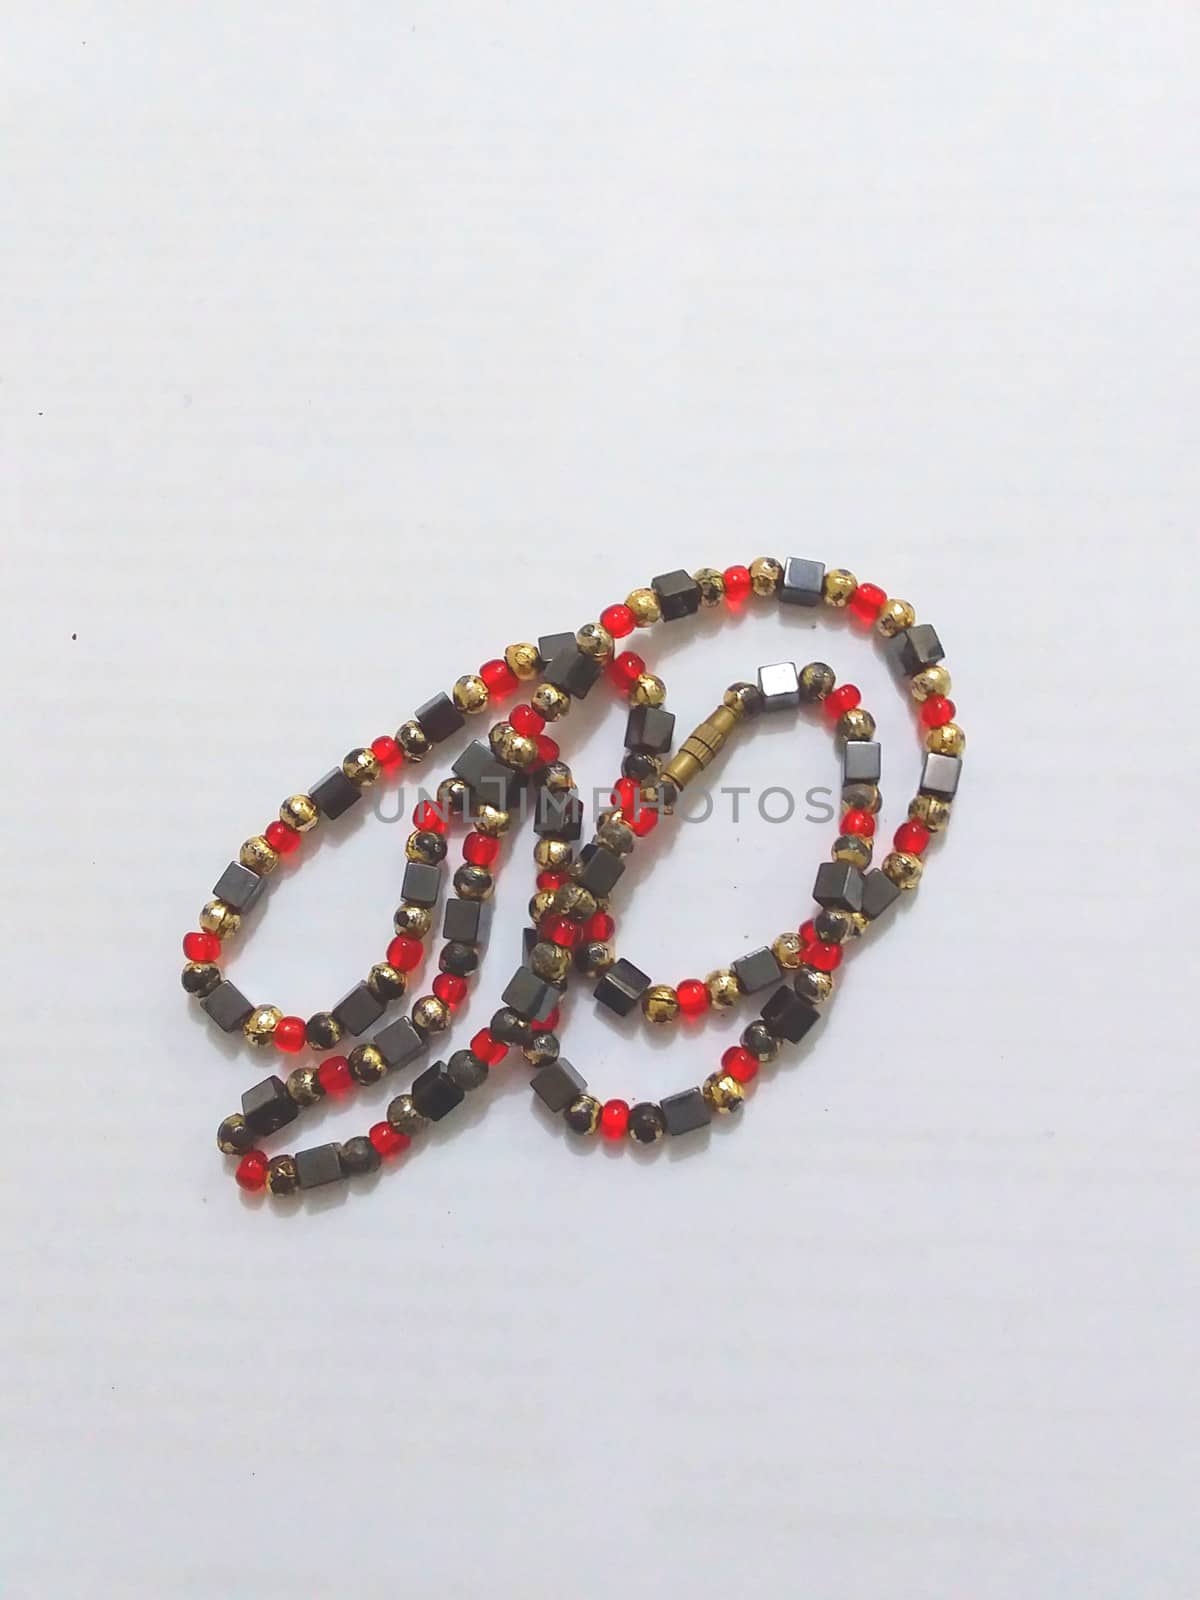 a necklace with red and green beads by gswagh71